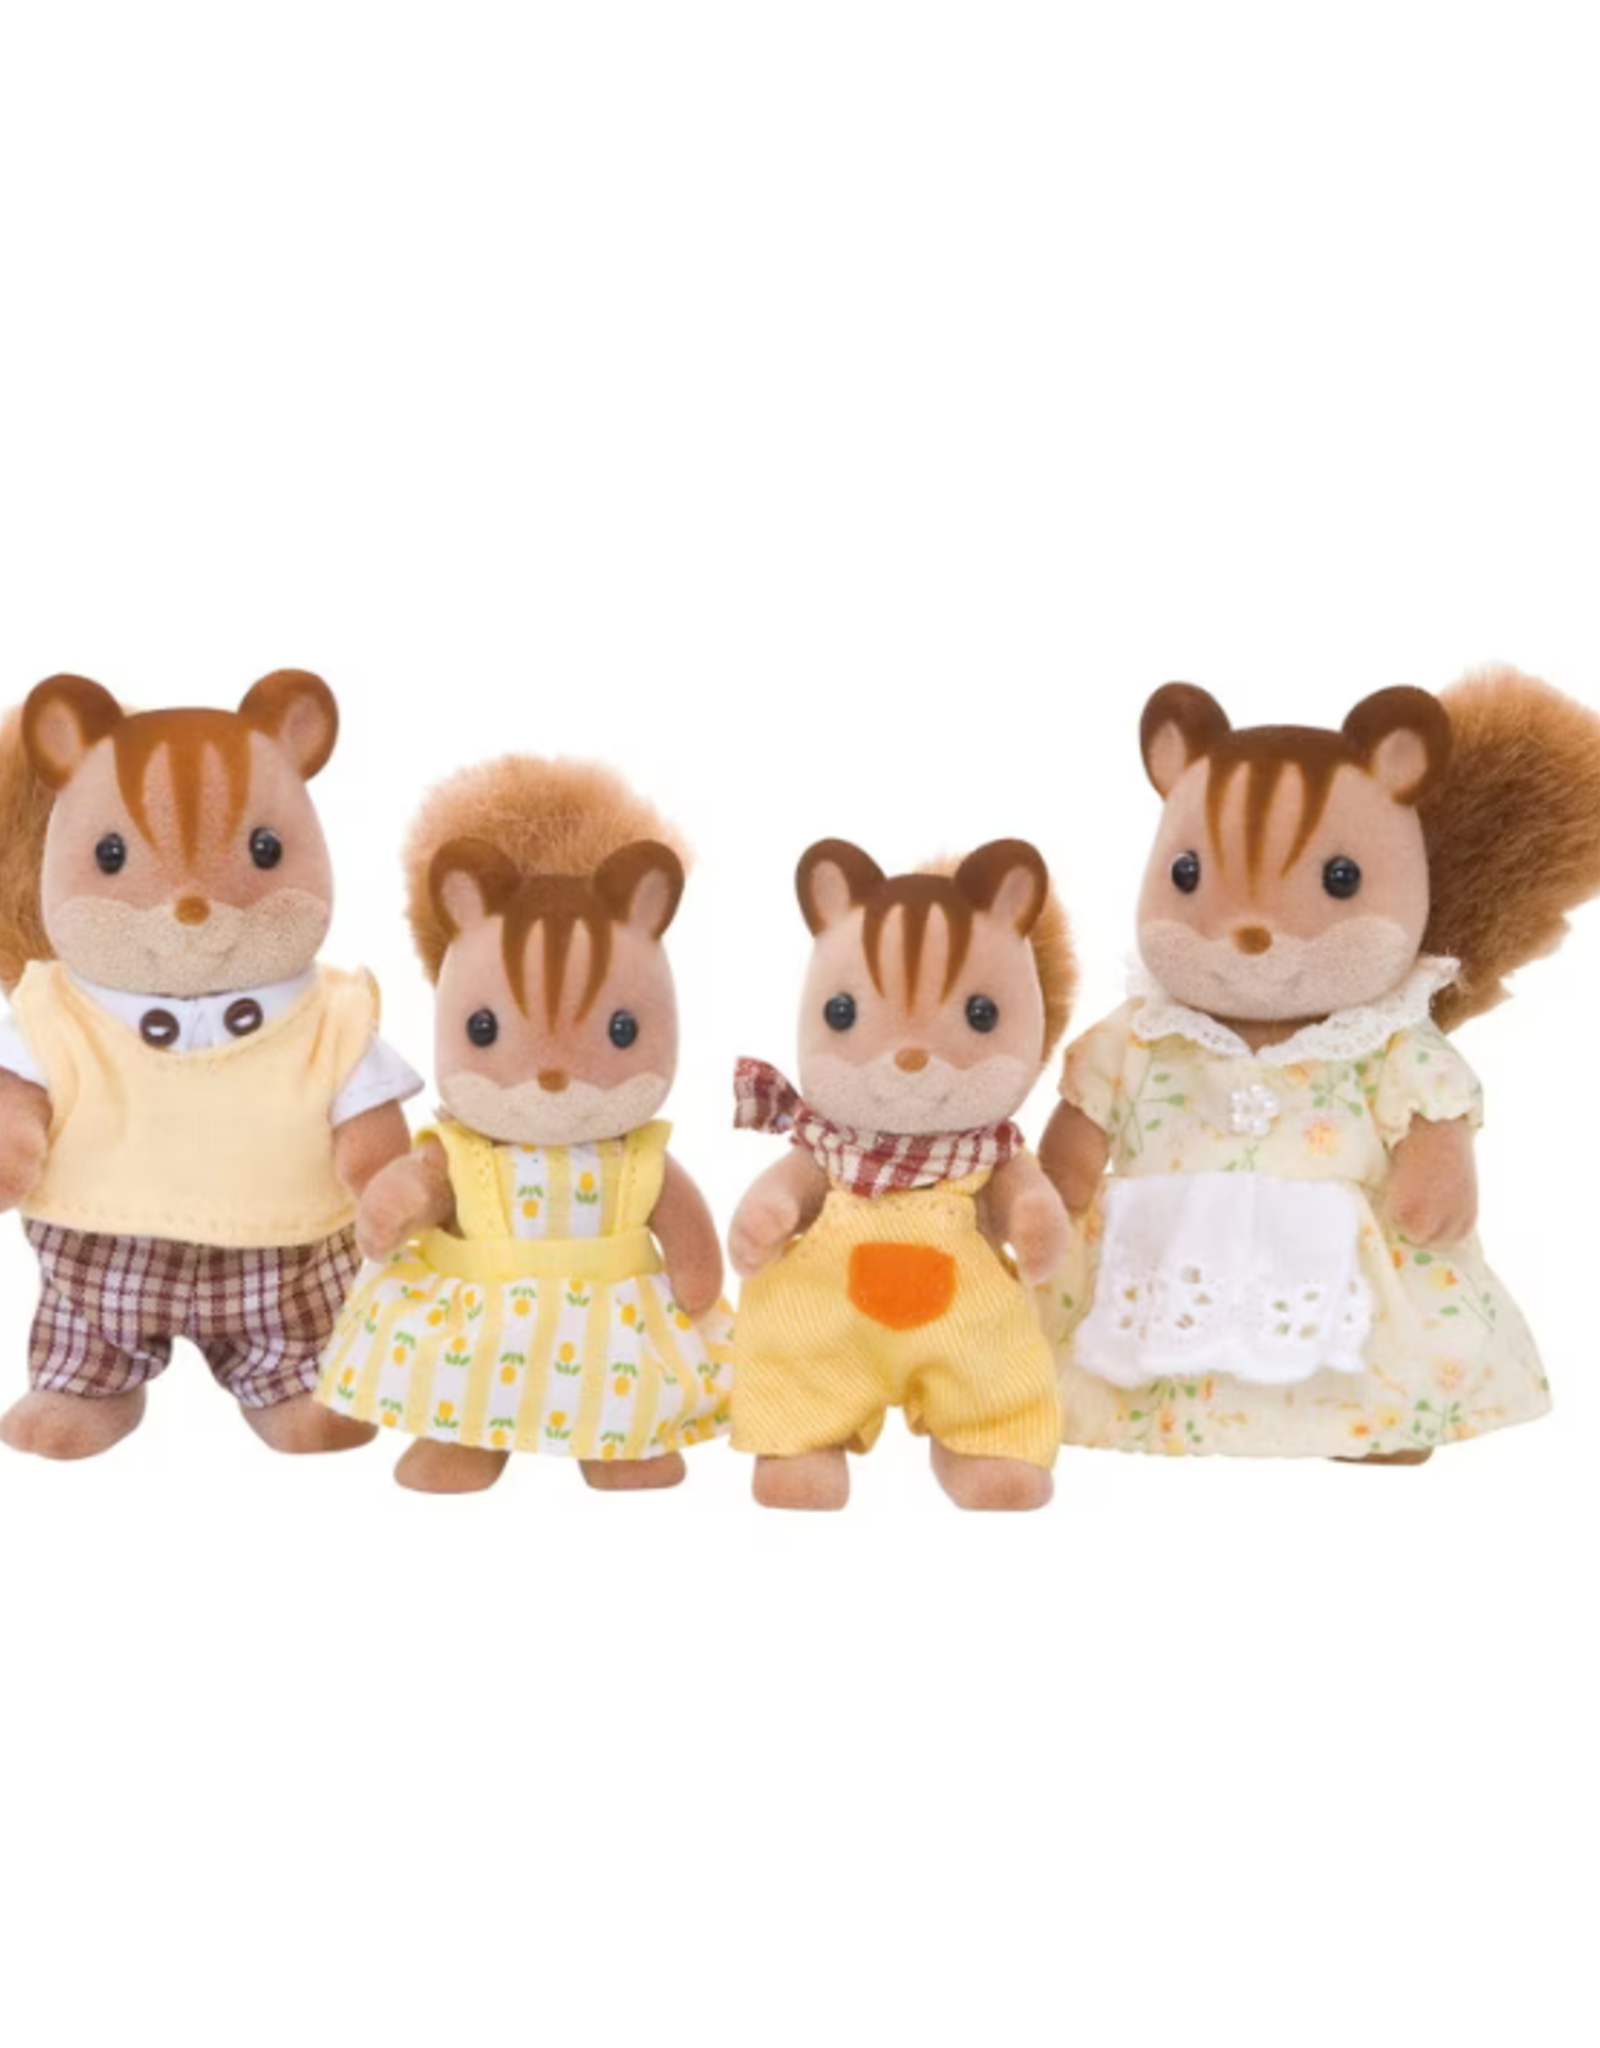 Calico Critters Calico Critters - Walnut Squirrel Family